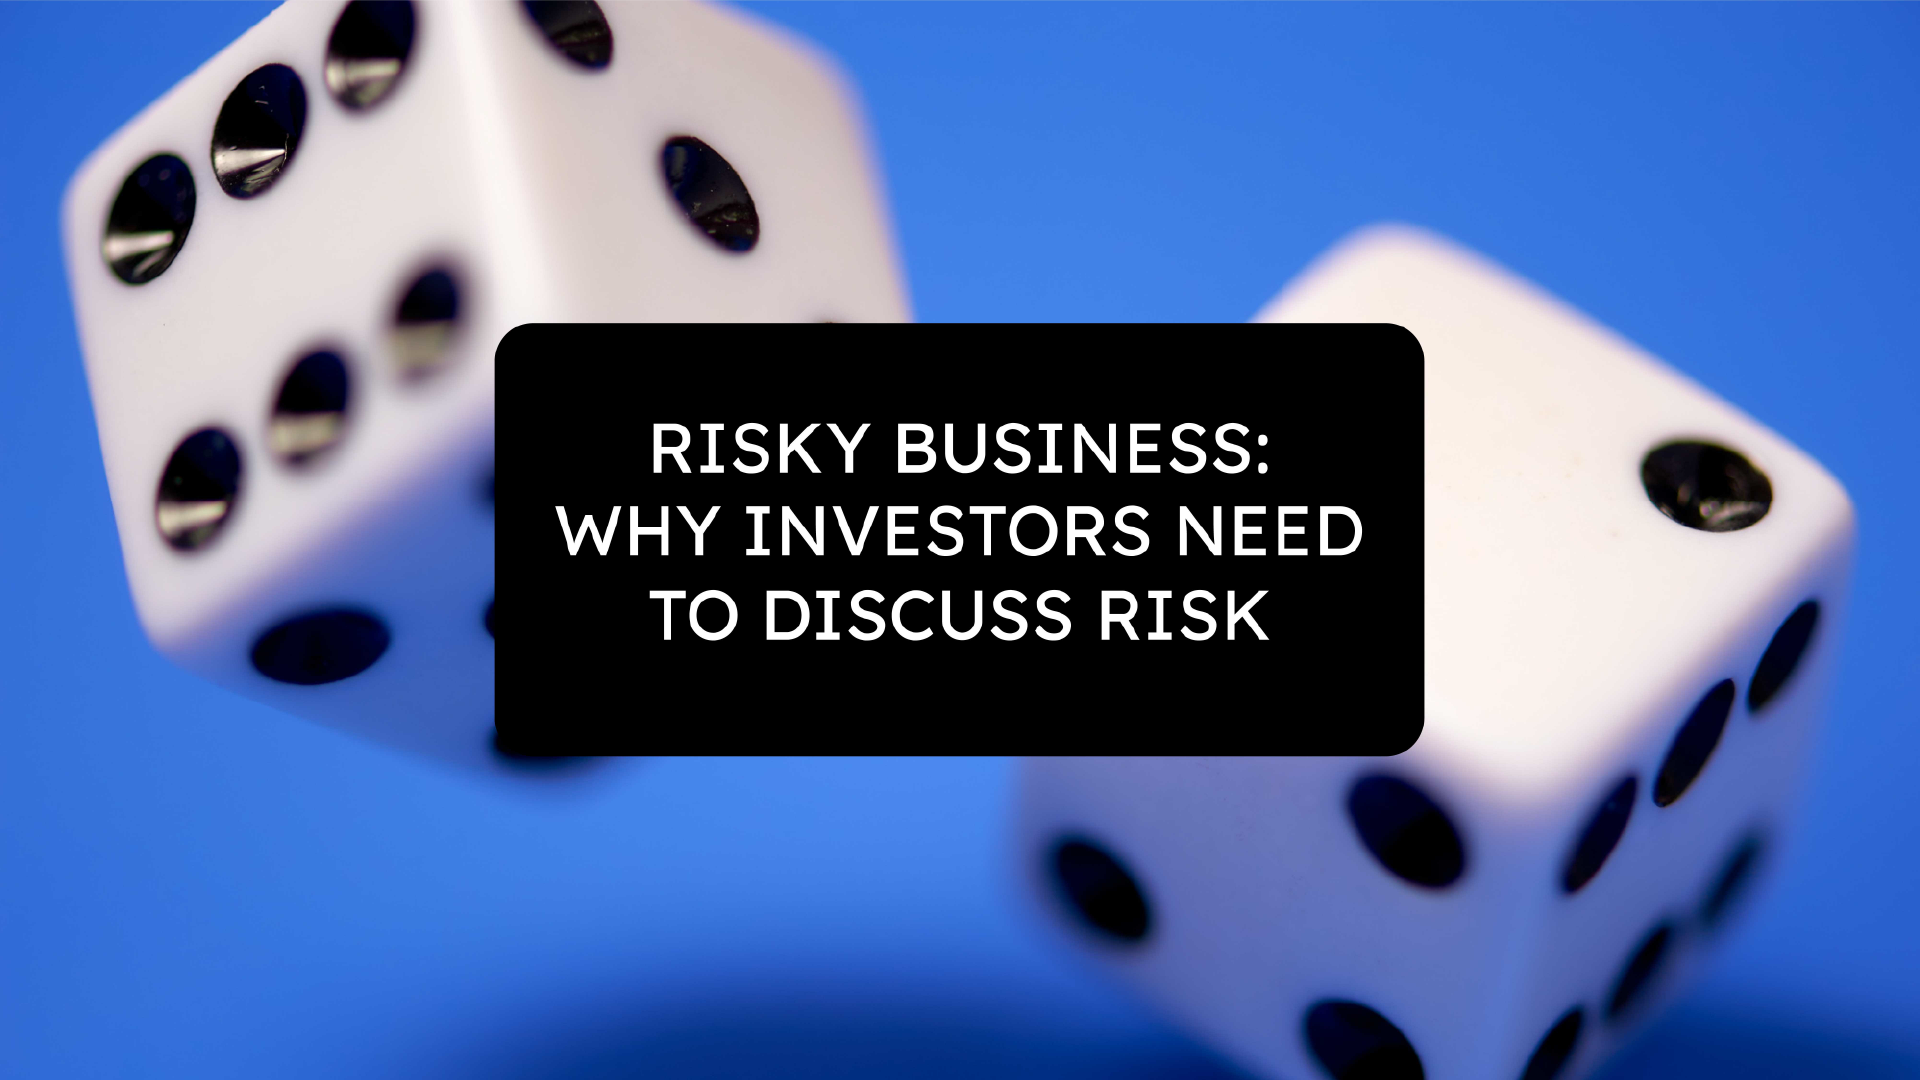 Risky Business: Why Investors Need to Discuss Risk